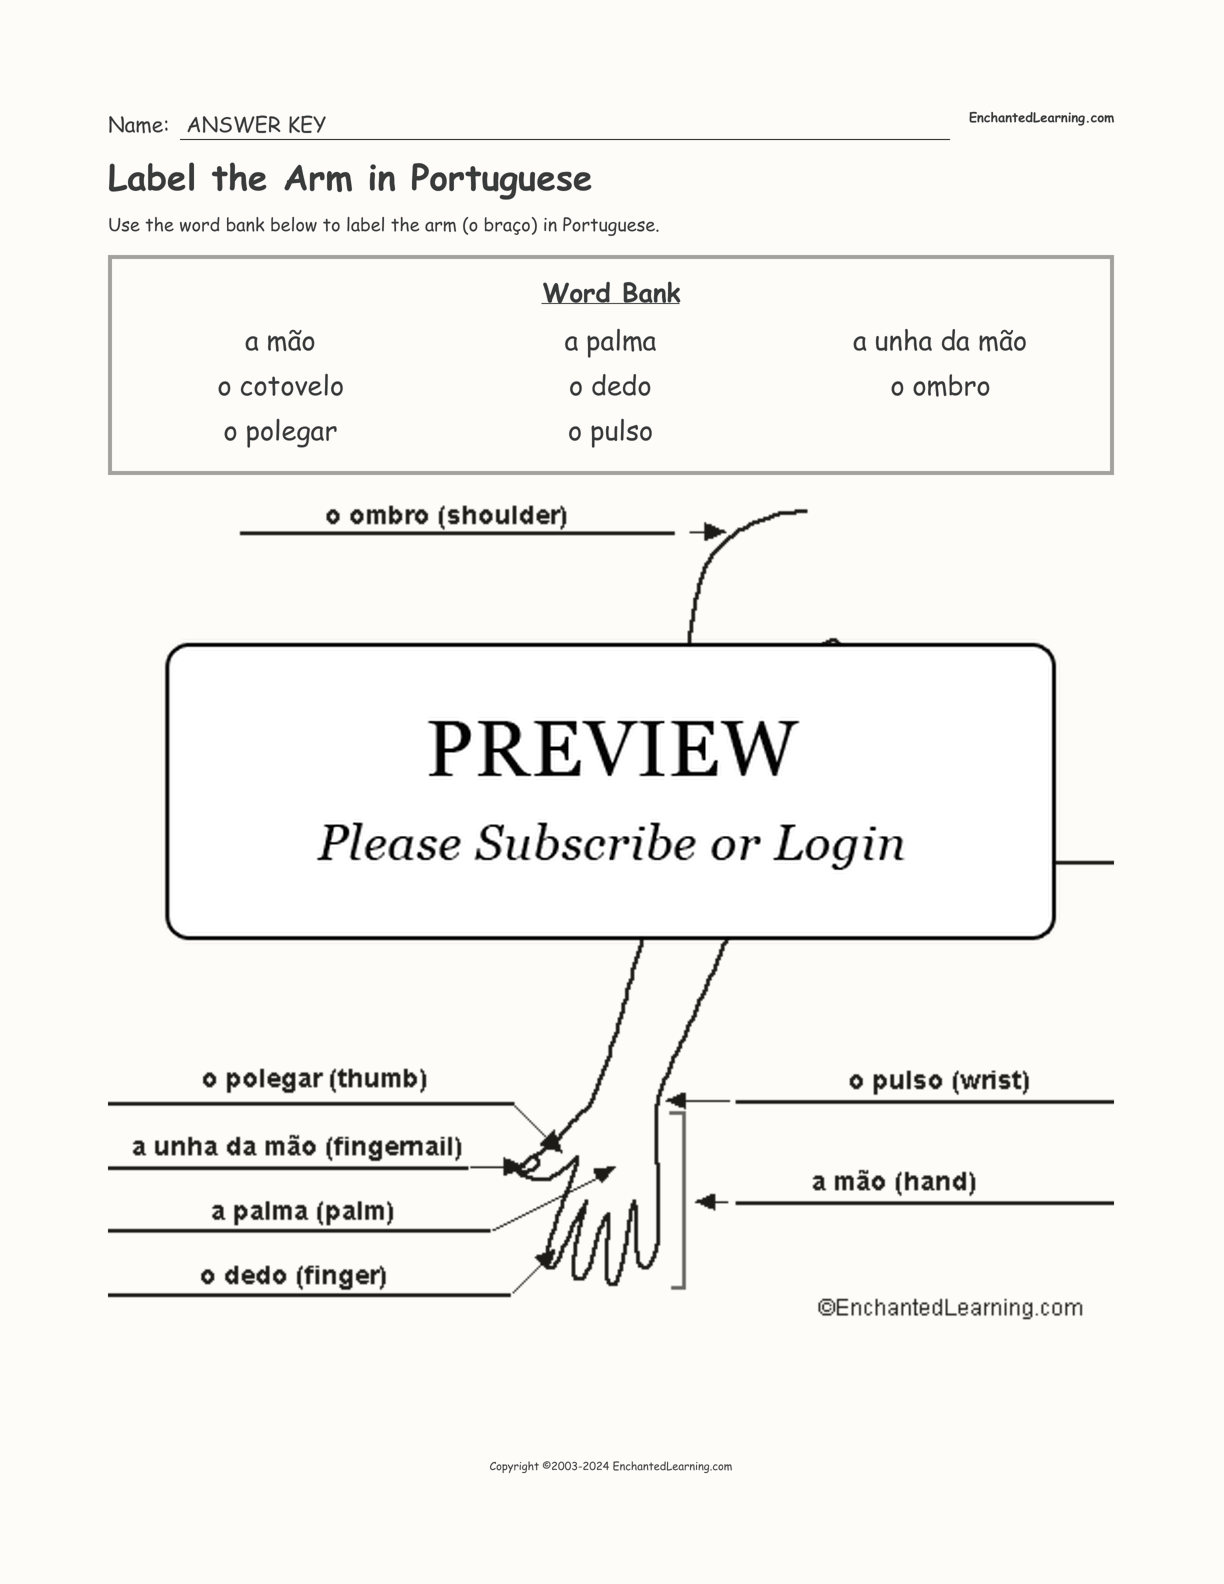 Label the Arm in Portuguese interactive worksheet page 2